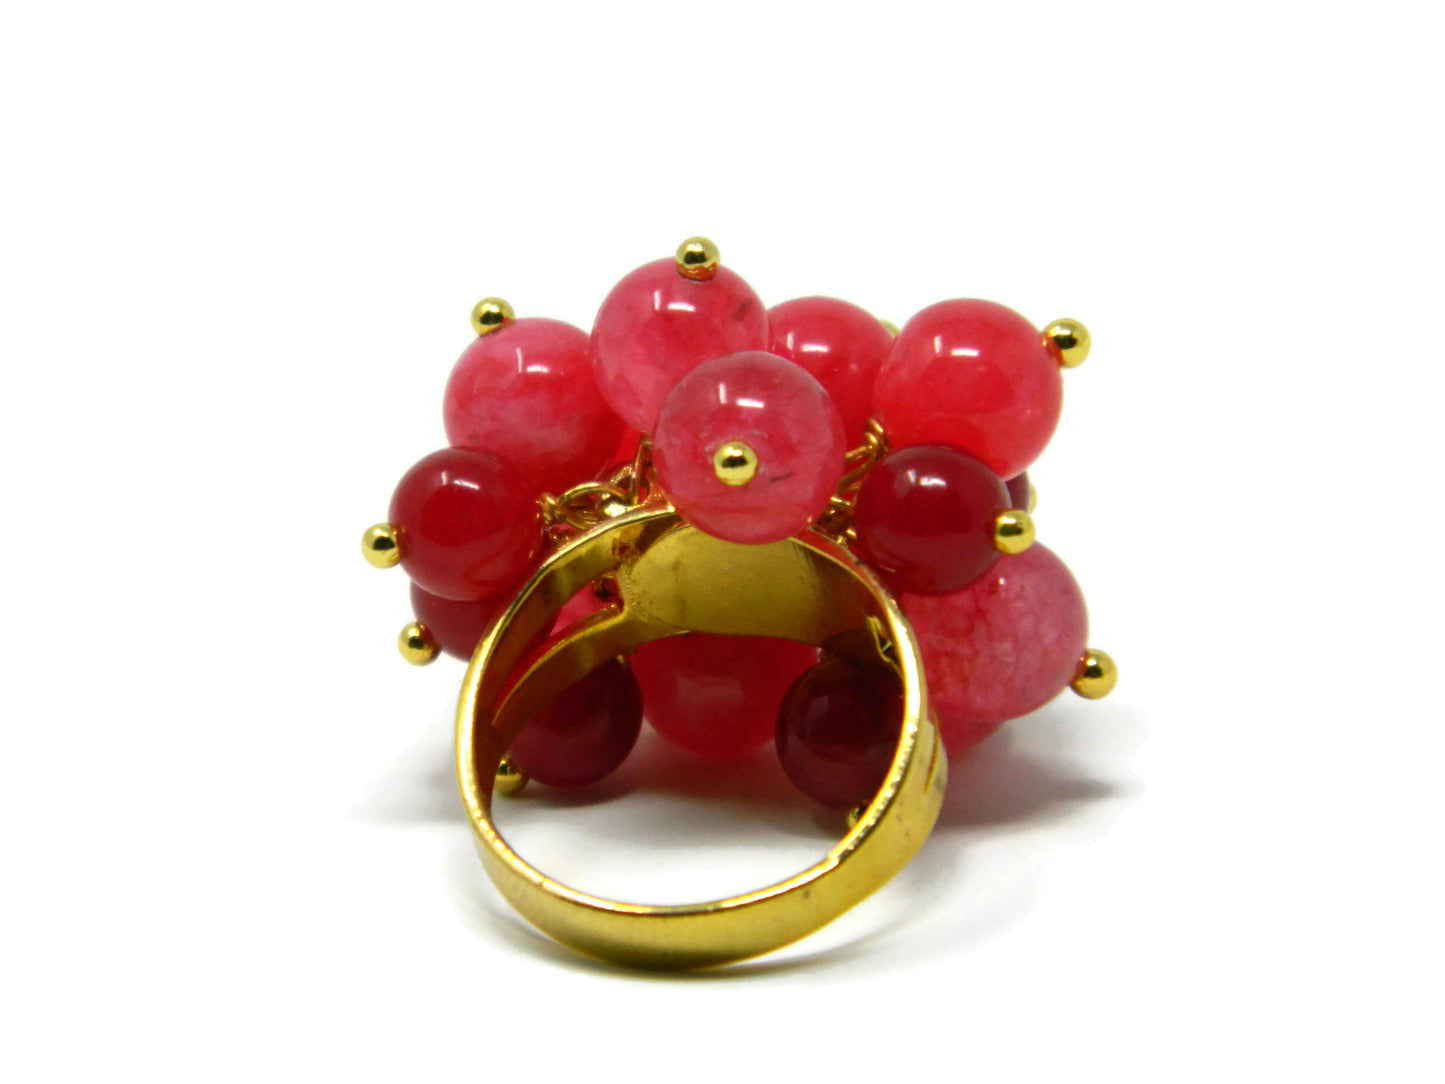 Cluster ring with fuchsia and burgundy red jade stones